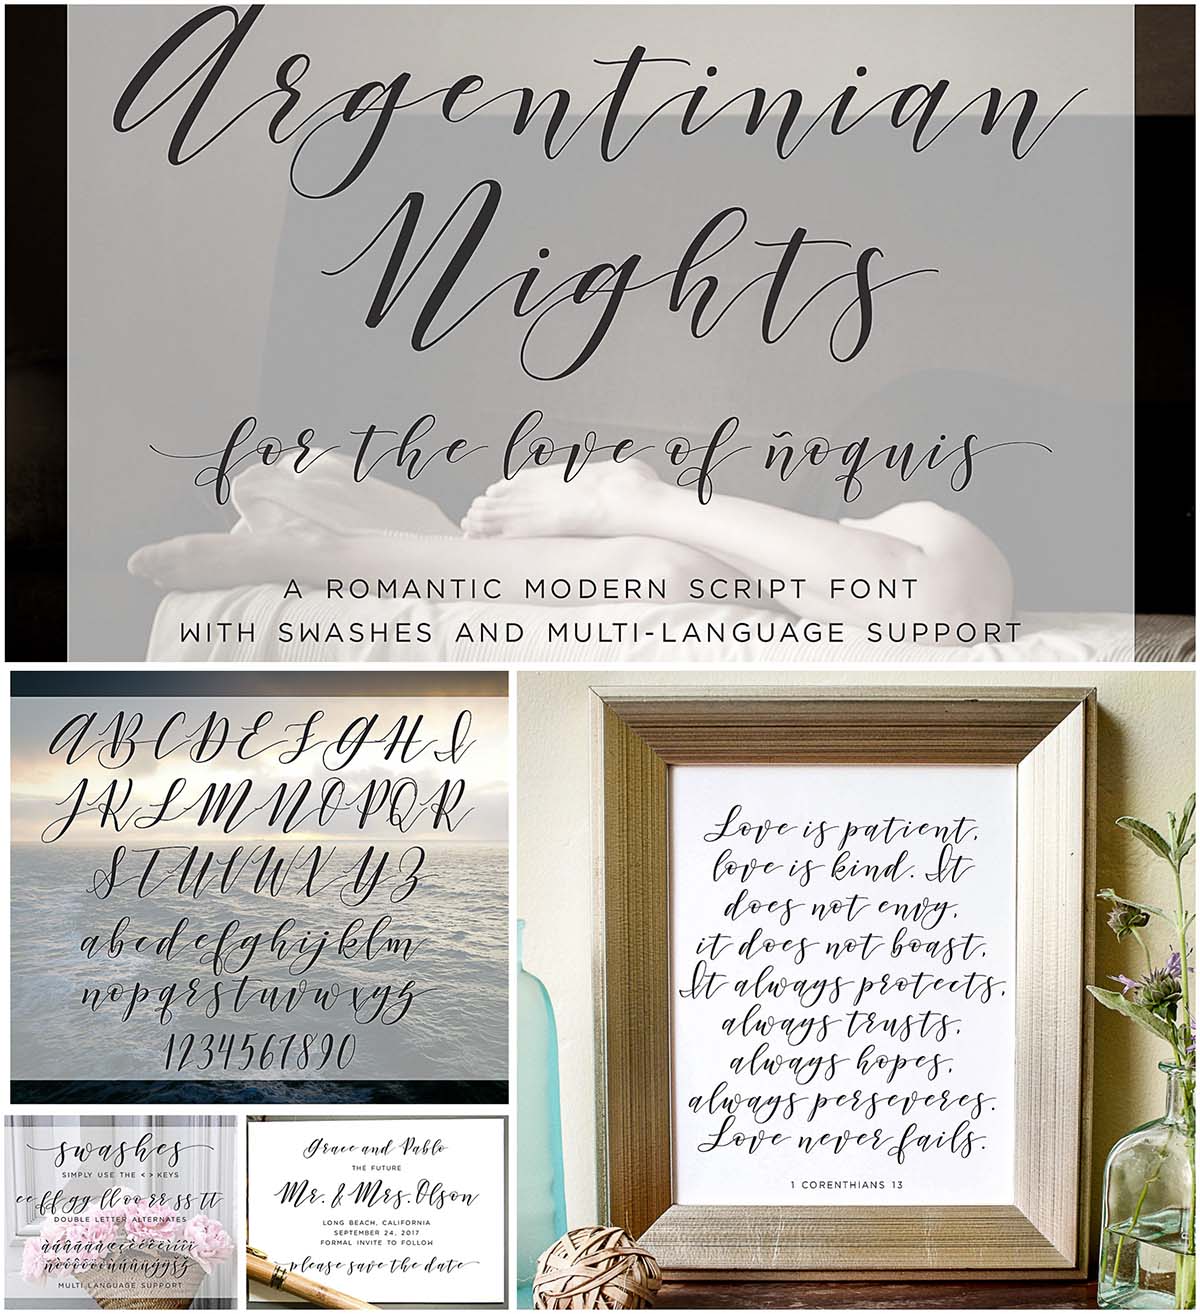 Argentinian nights calligraphy font